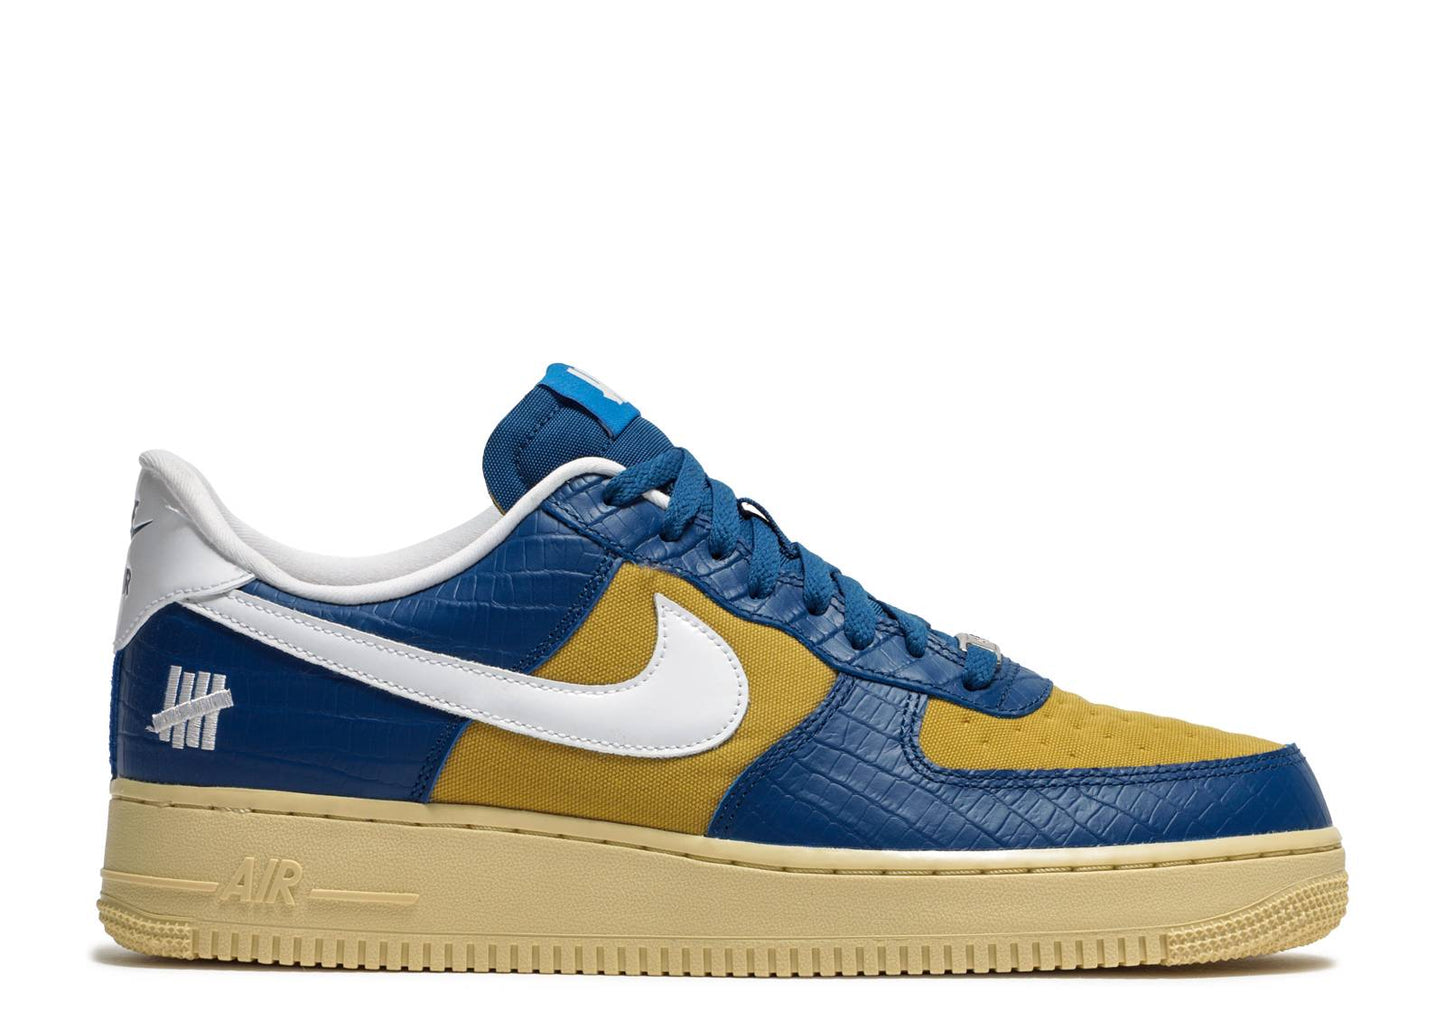 Nike Air Force 1 Low Undefeated On It Blue Yellow Croc (Preowned)